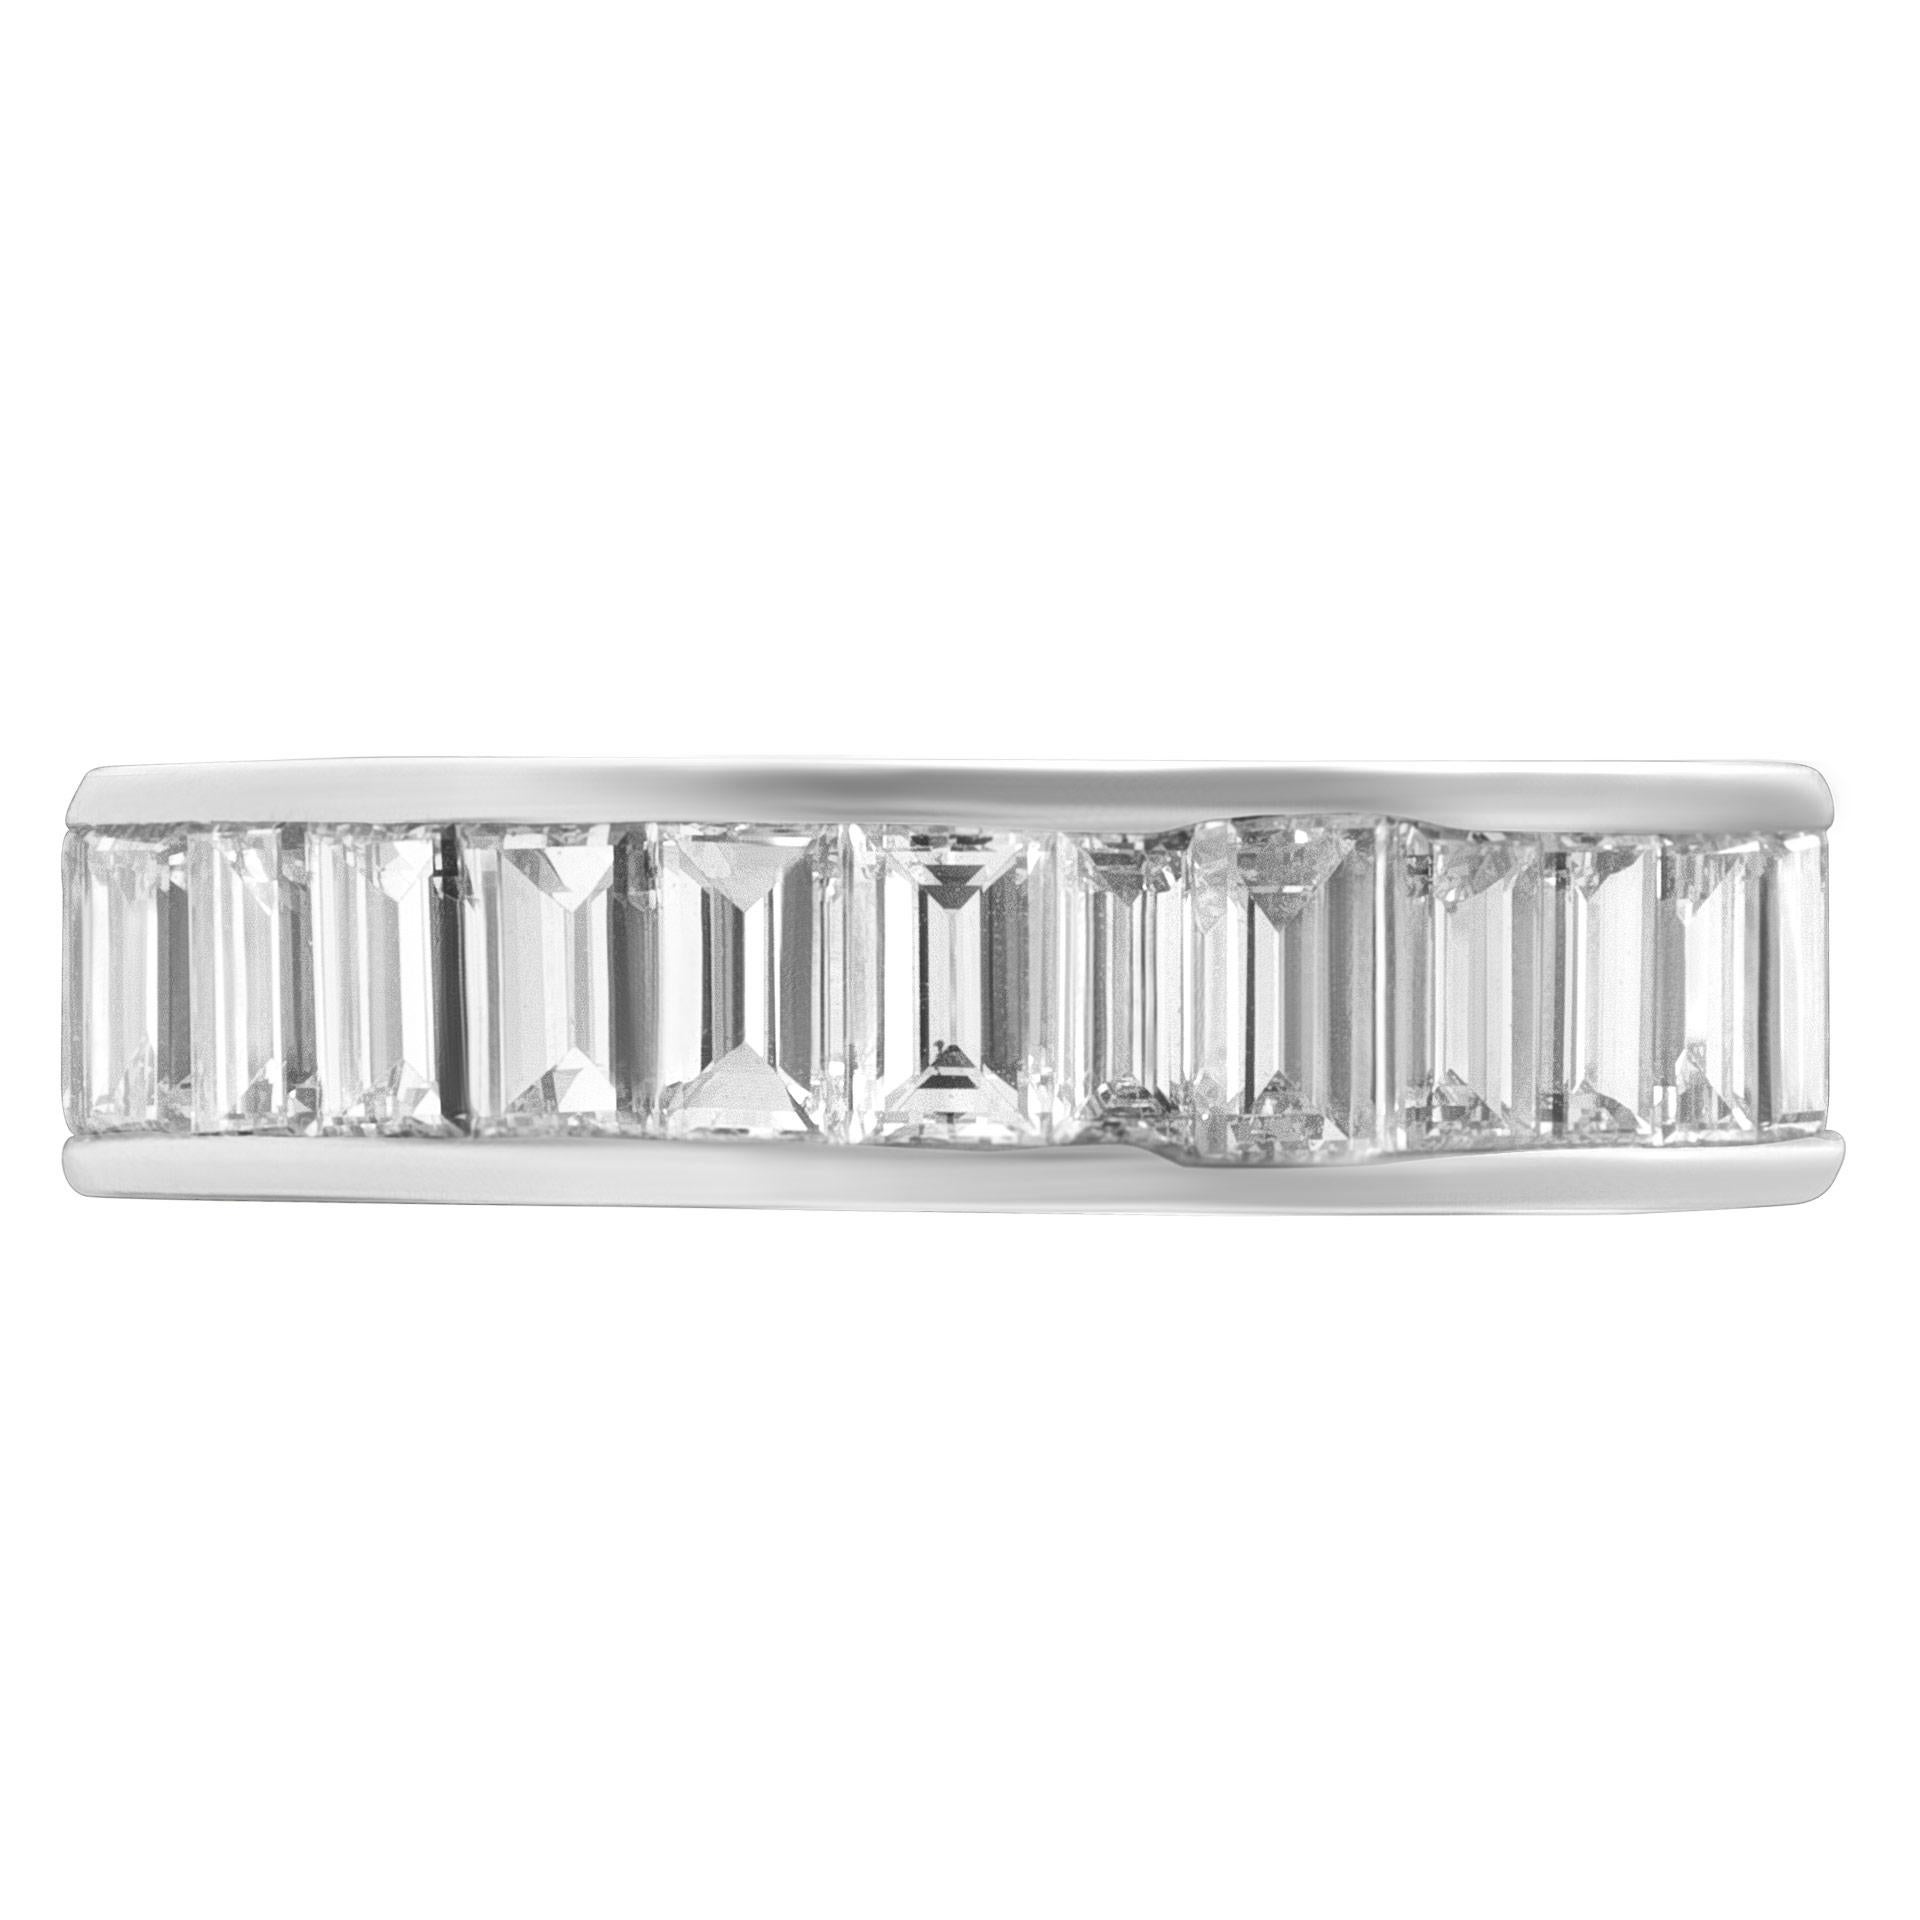 Diamond Eternity Band with Baguette Cut Diamonds Set Platinum, Tcw 5.50 Carats In Excellent Condition For Sale In Surfside, FL